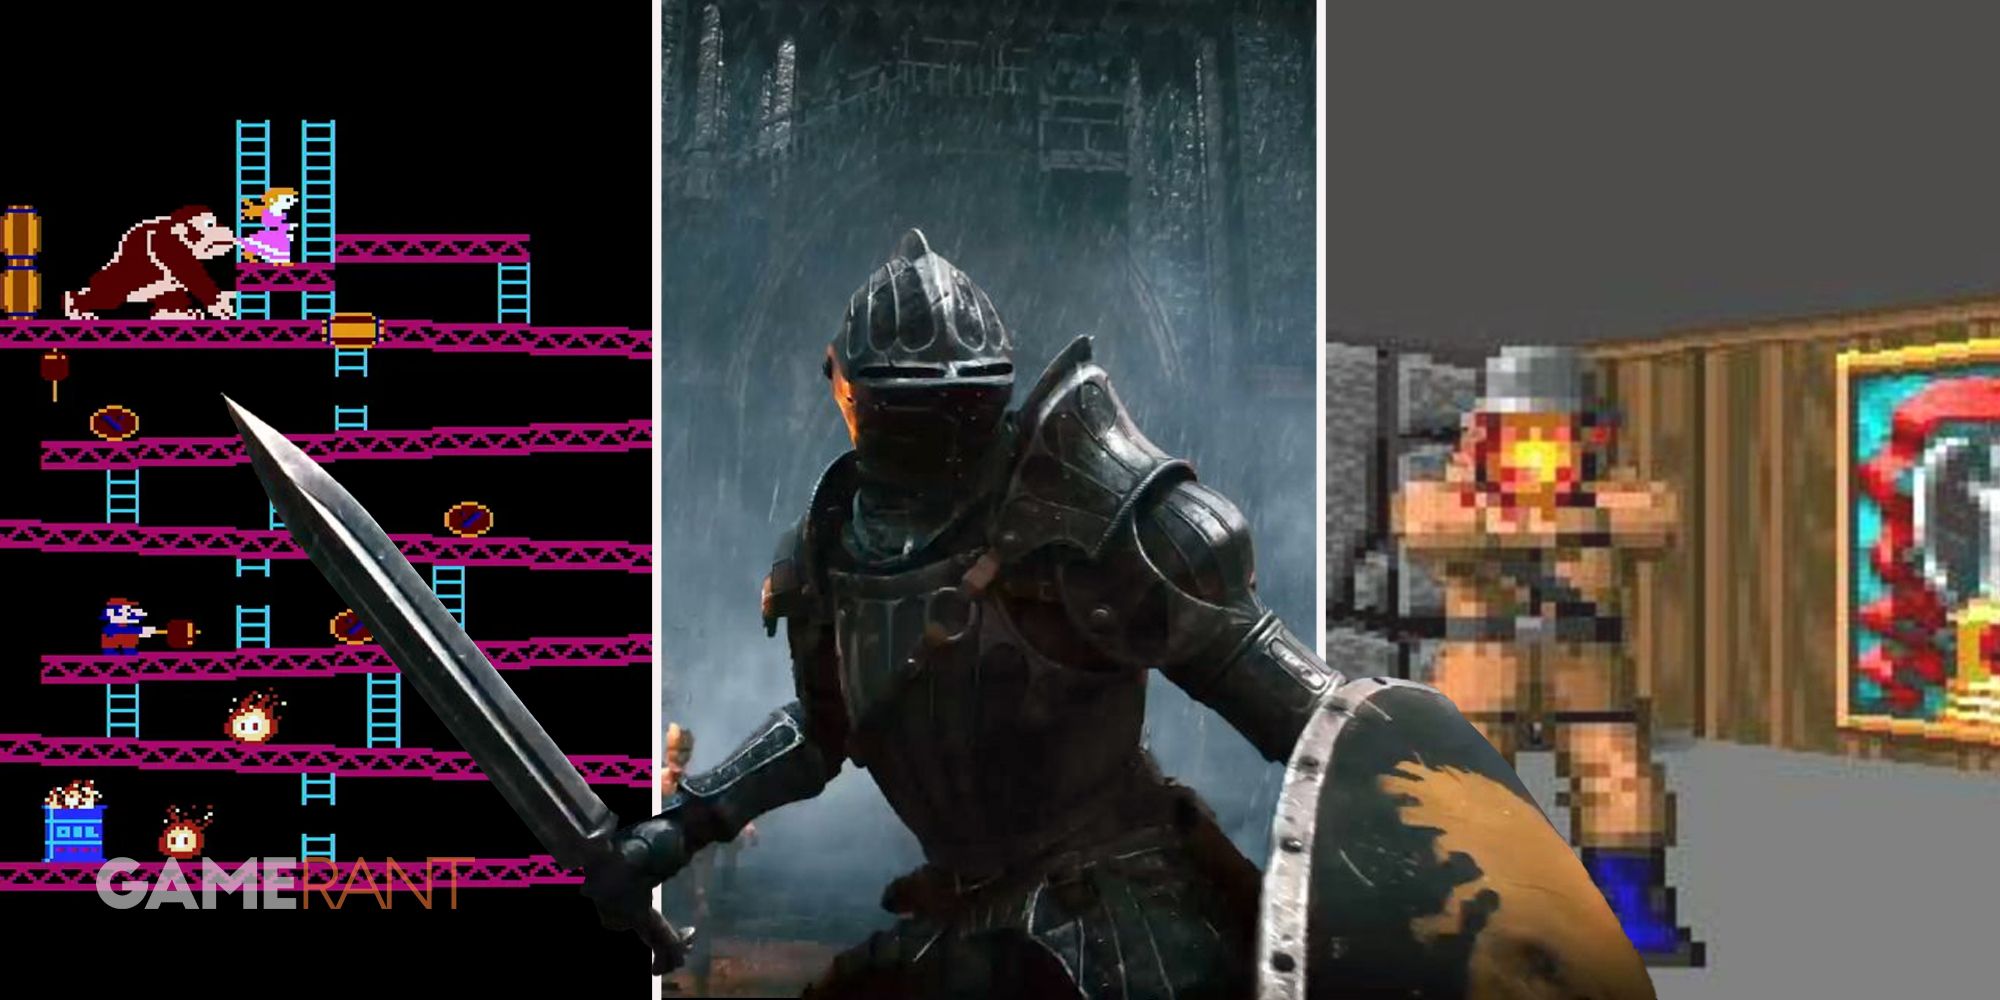 Donkey Kong classic arcade game on left, Demon's Souls character readying for battle in middle, Wolfenstein 3D player getting shot at on right